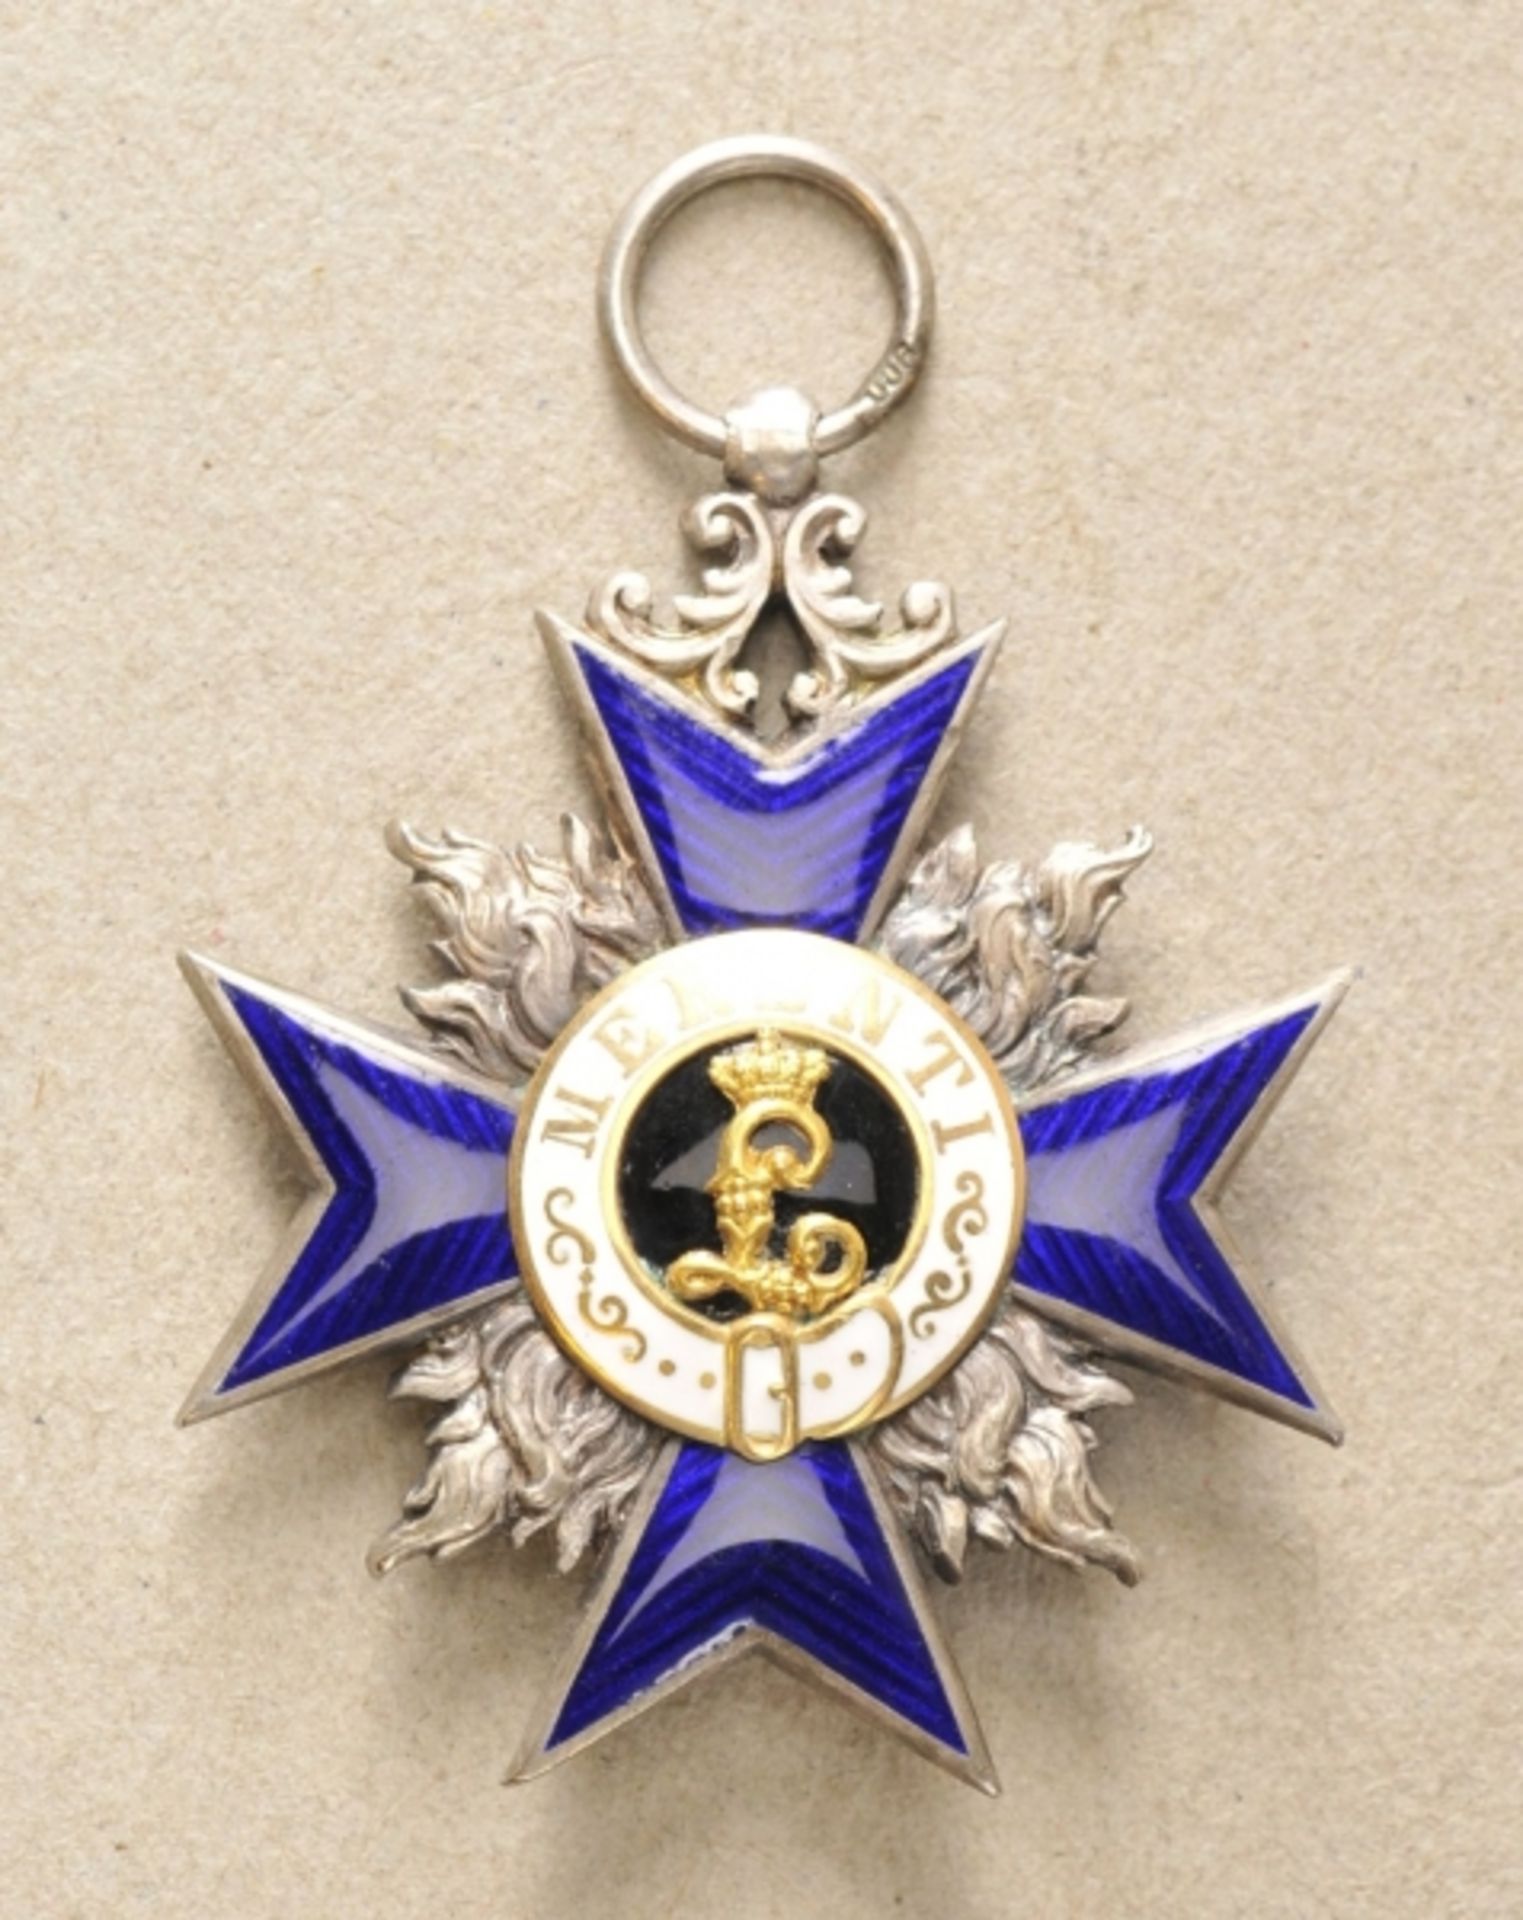 Bavaria: Military Order of Merit, 4th class. Silver, medaillons gold, partly enameled, revers with